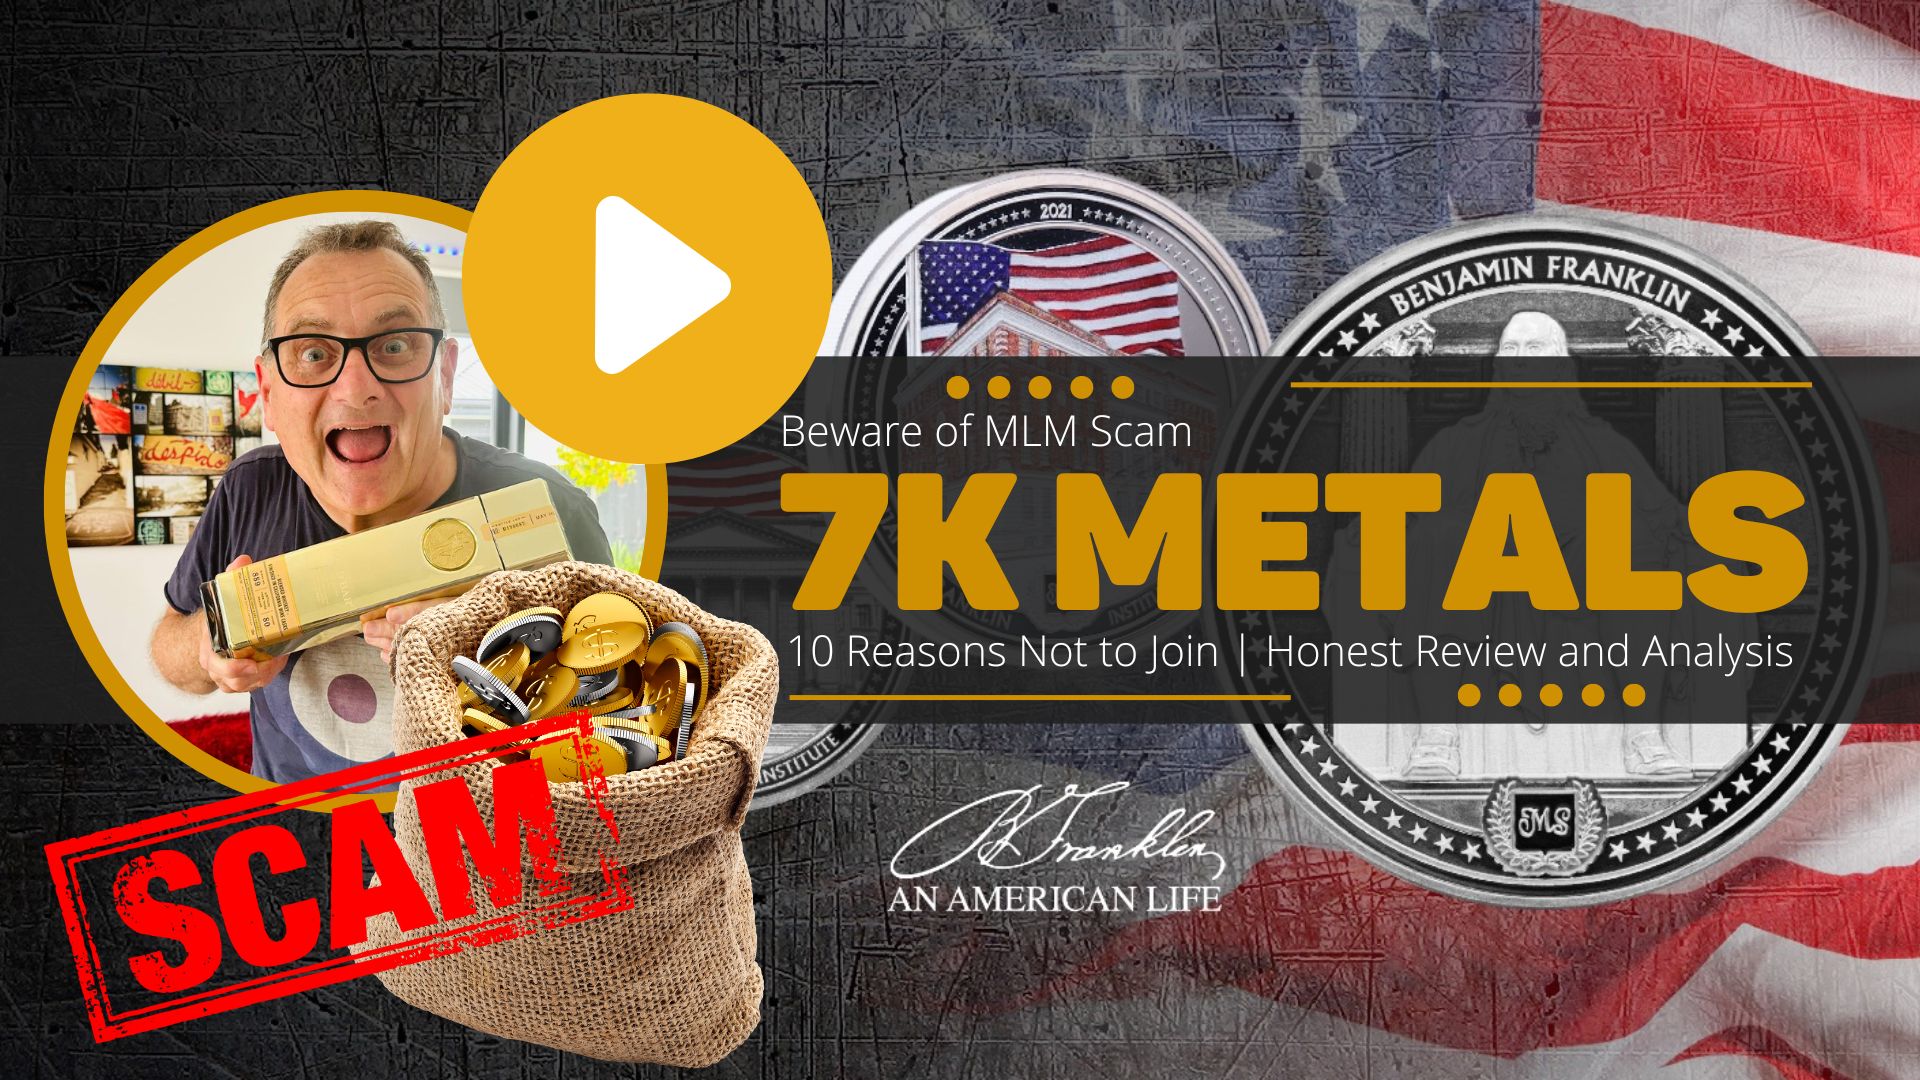 Beware of 7K Metals MLM Scam 10 Reasons Not to Join | Honest Review and Analysis 2023 Entrepreneur Decision Maker Connector Podcaster Educator